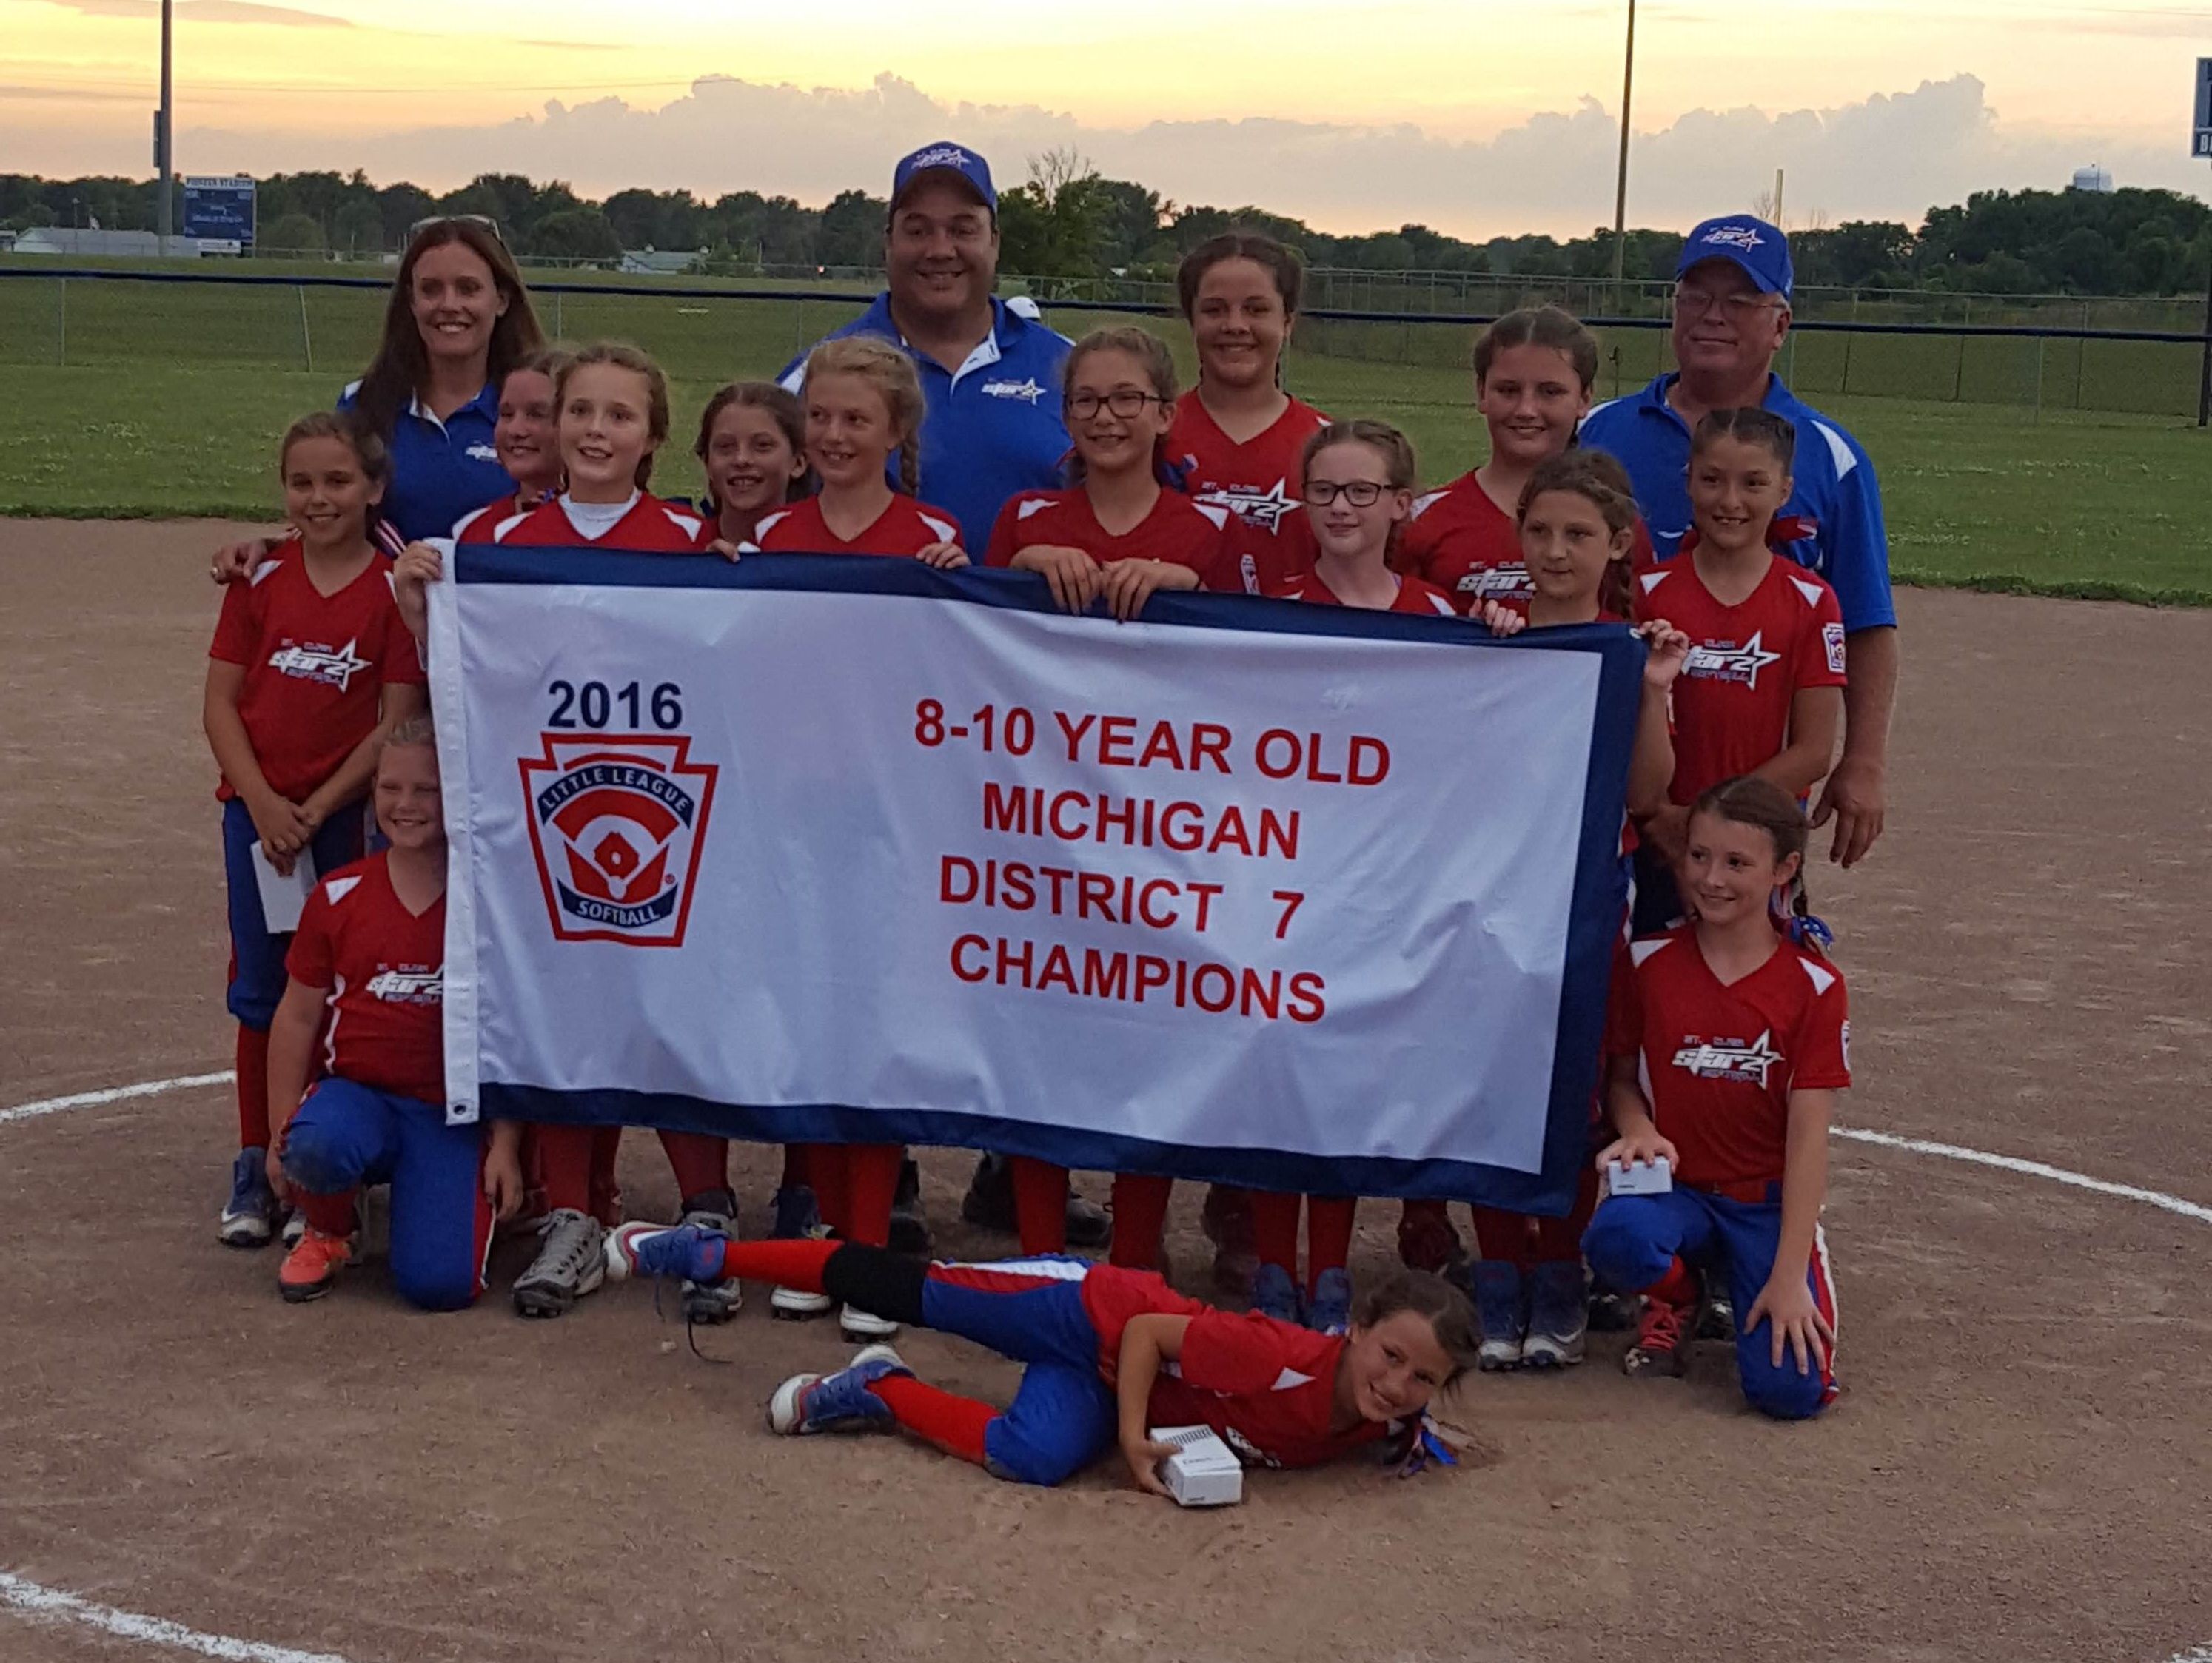 St. Clair 10U softball poses with their district championship banner.